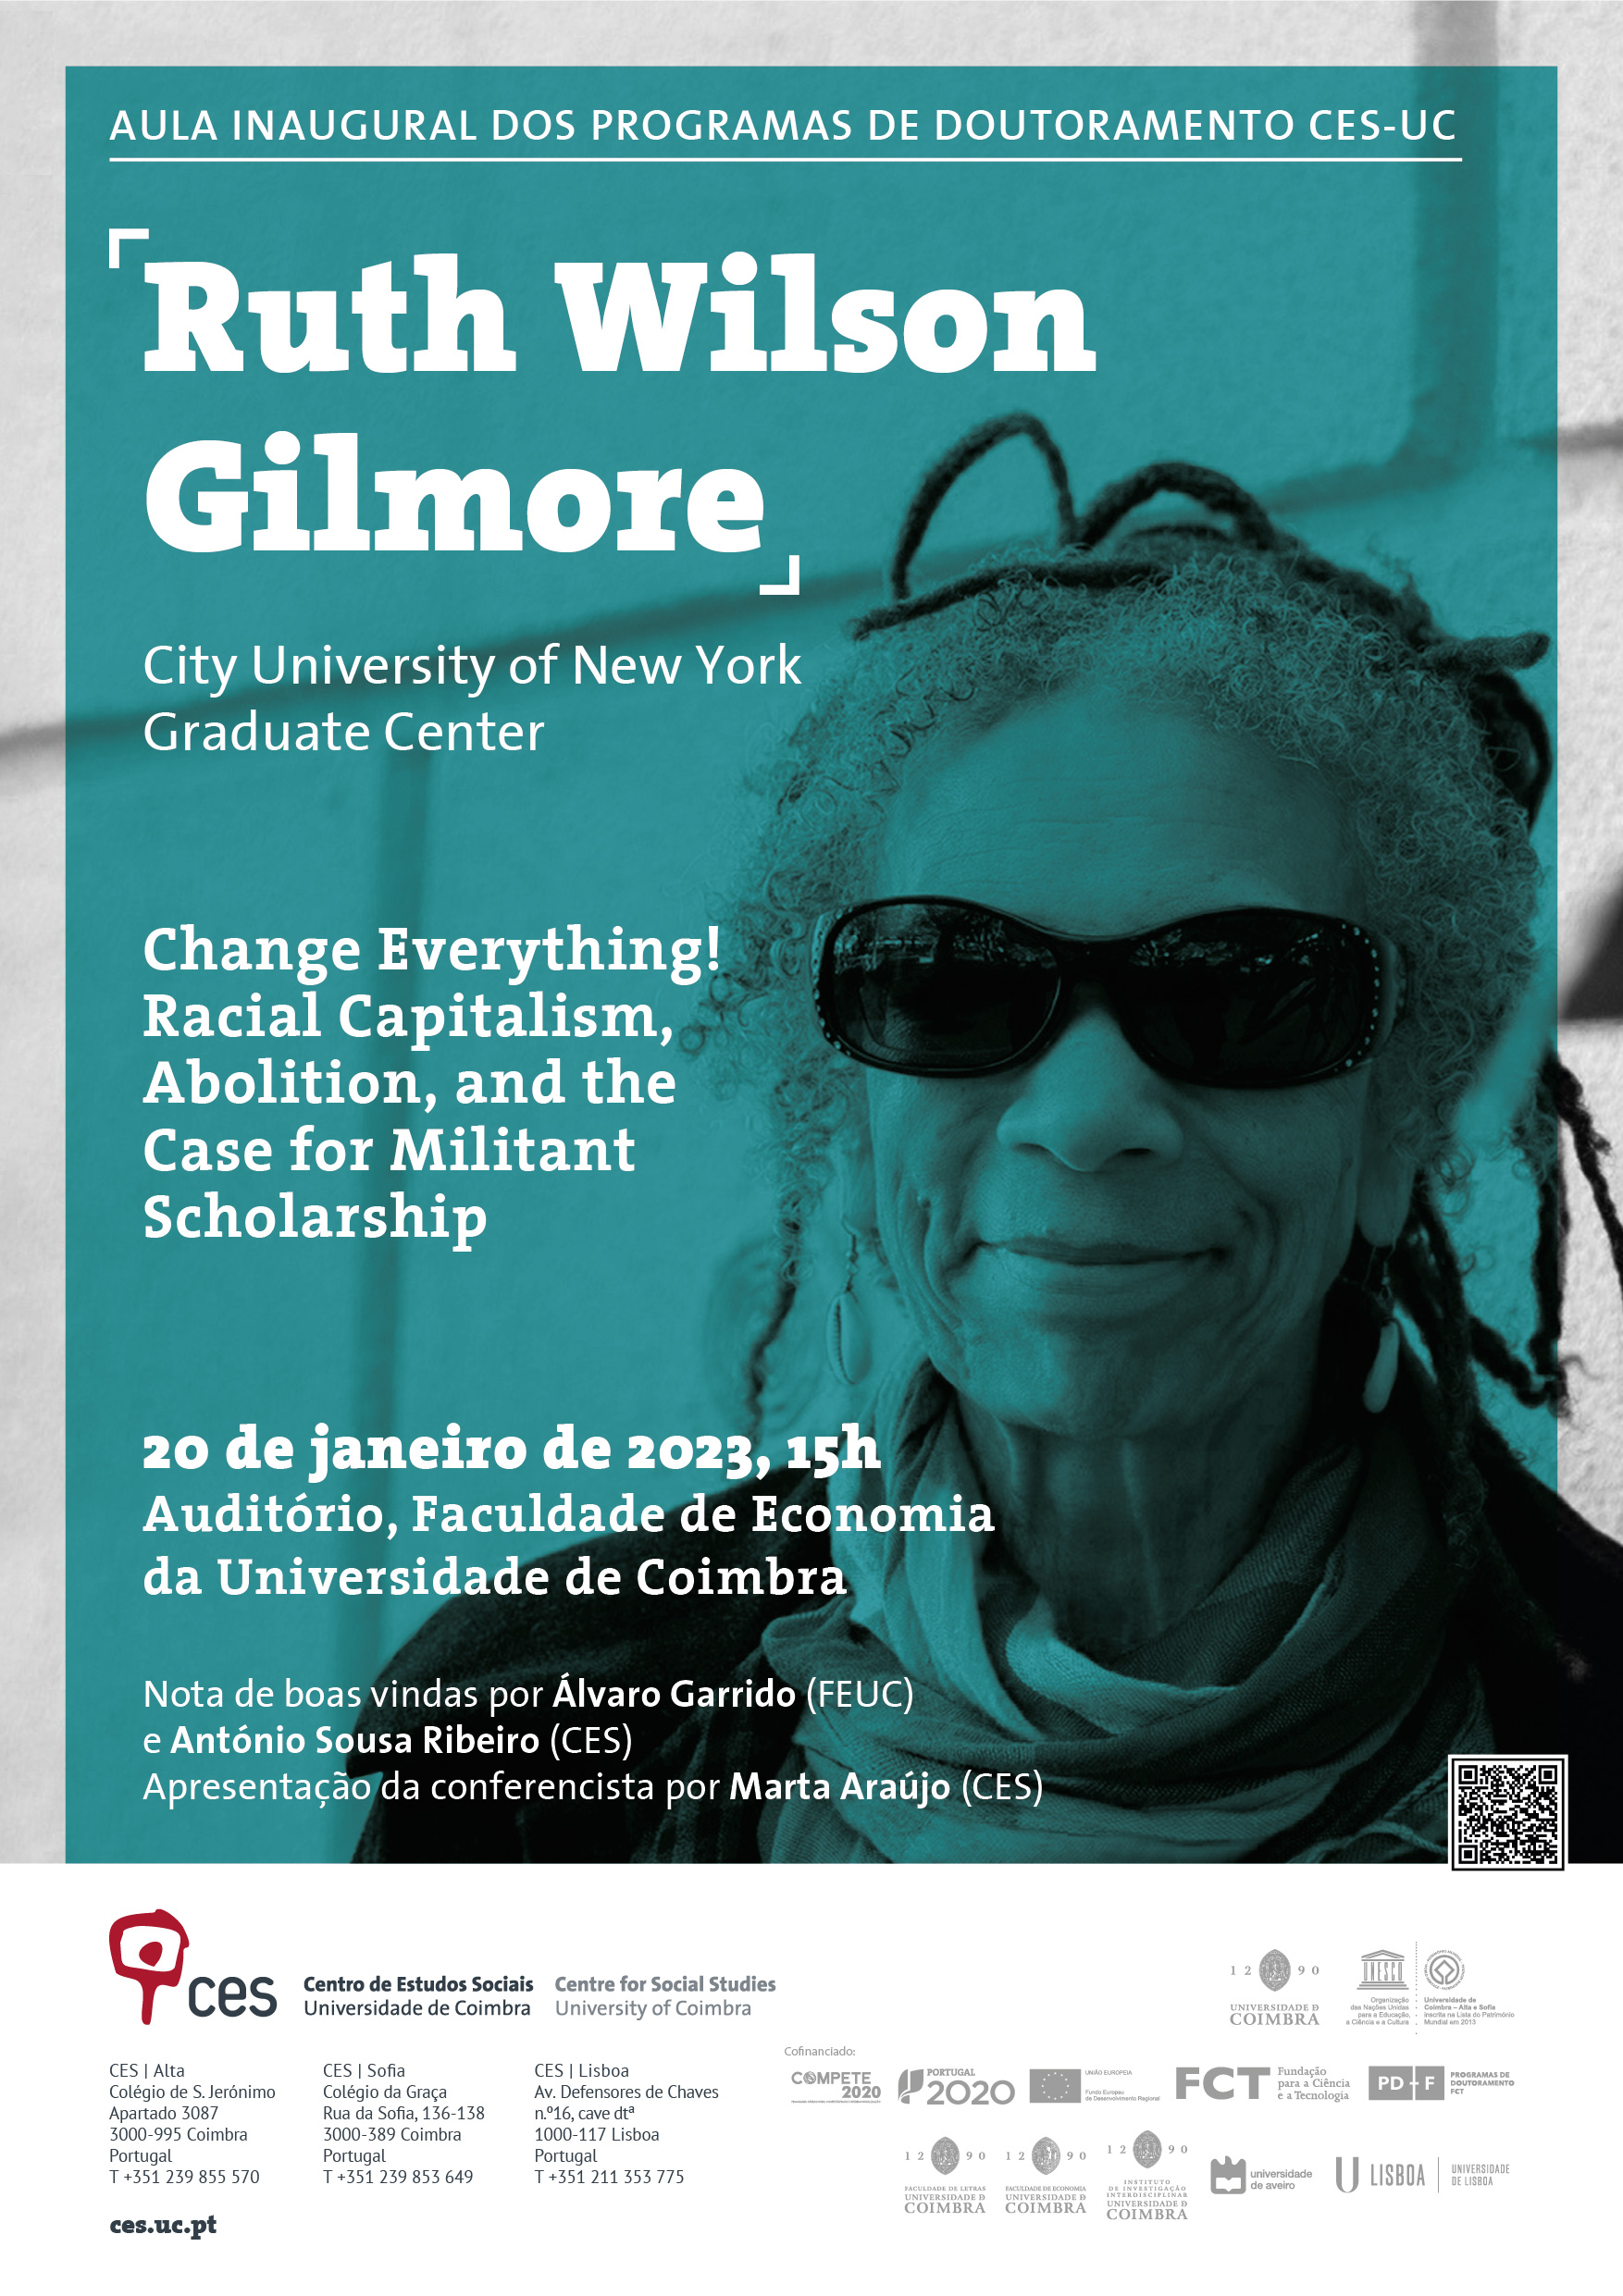 Change Everything! Racial Capitalism, Abolition, and the Case for Militant Scholarship<span id="edit_39220"><script>$(function() { $('#edit_39220').load( "/myces/user/editobj.php?tipo=evento&id=39220" ); });</script></span>